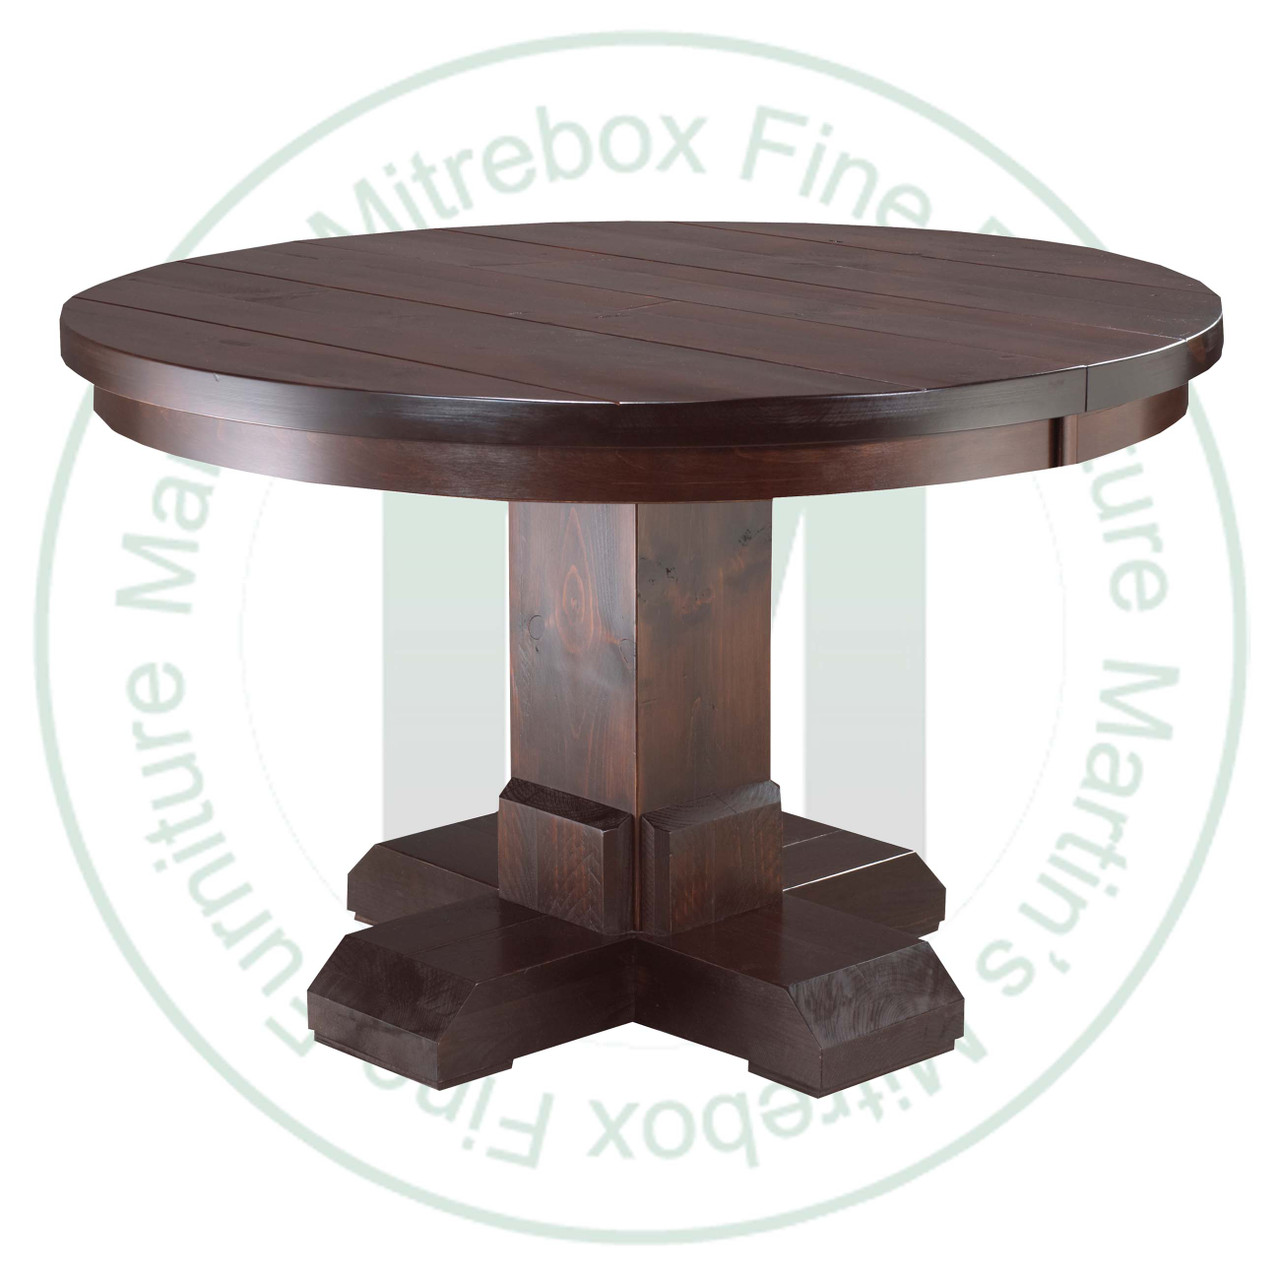 Wormy Maple Shrewsbury Single Pedestal Table 42''D x 54''W x 30''H Round Solid Table. Table Has 1.25'' Thick Top.